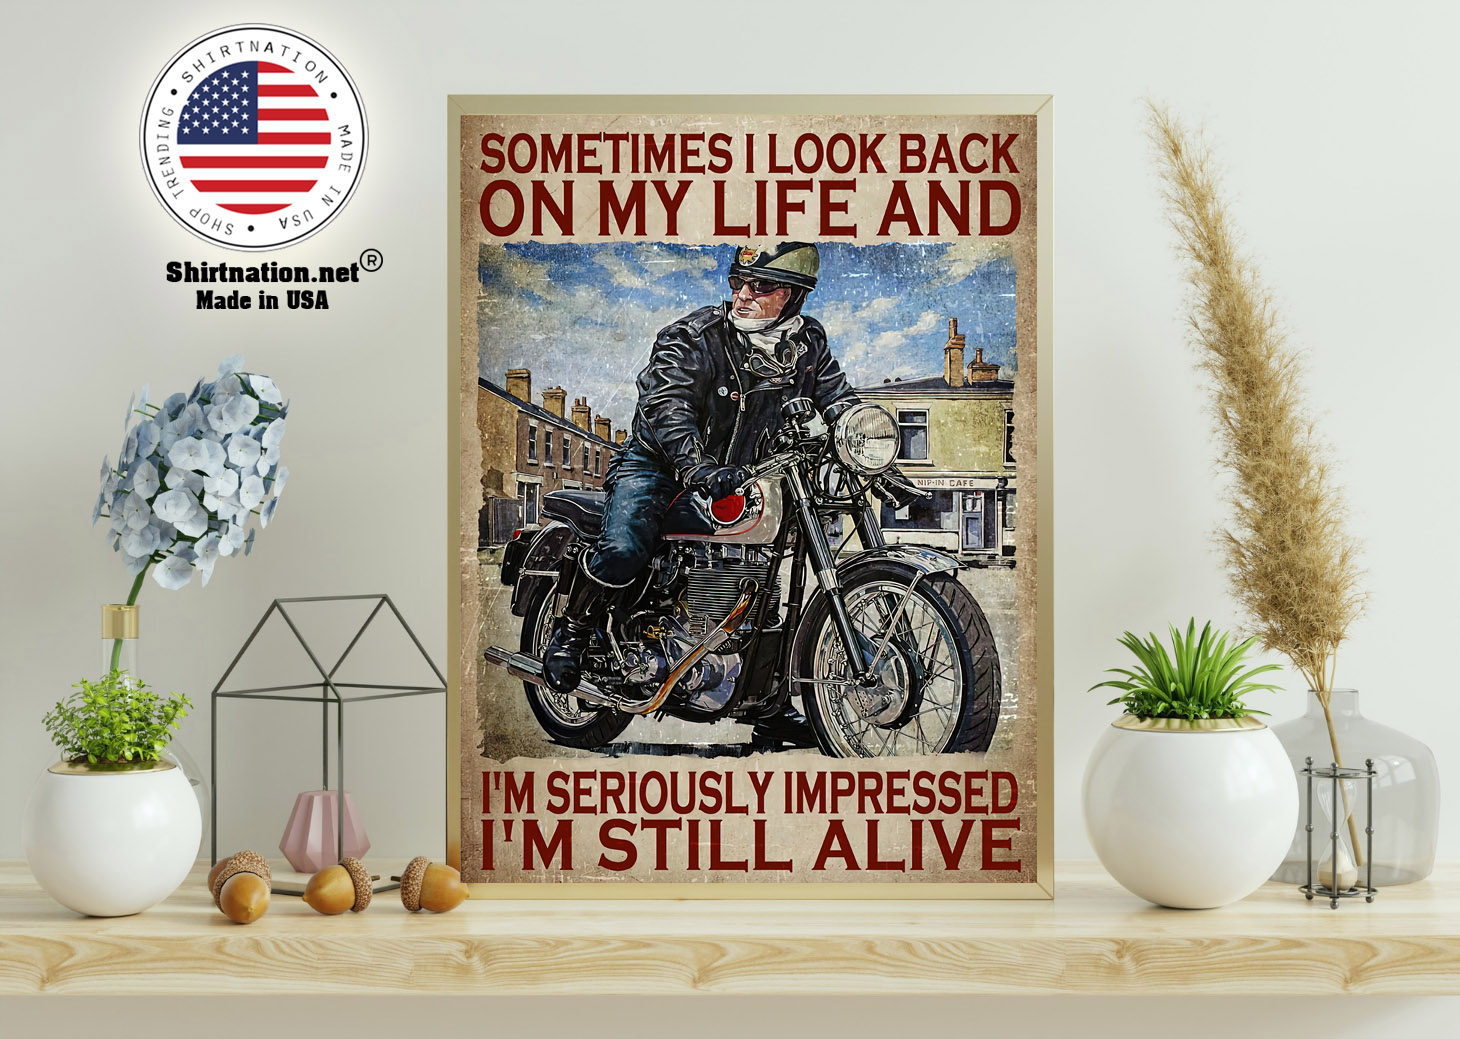 Motorcycles man Sometimes I look back on my life and Im seriously impressed Im still alive poster 11